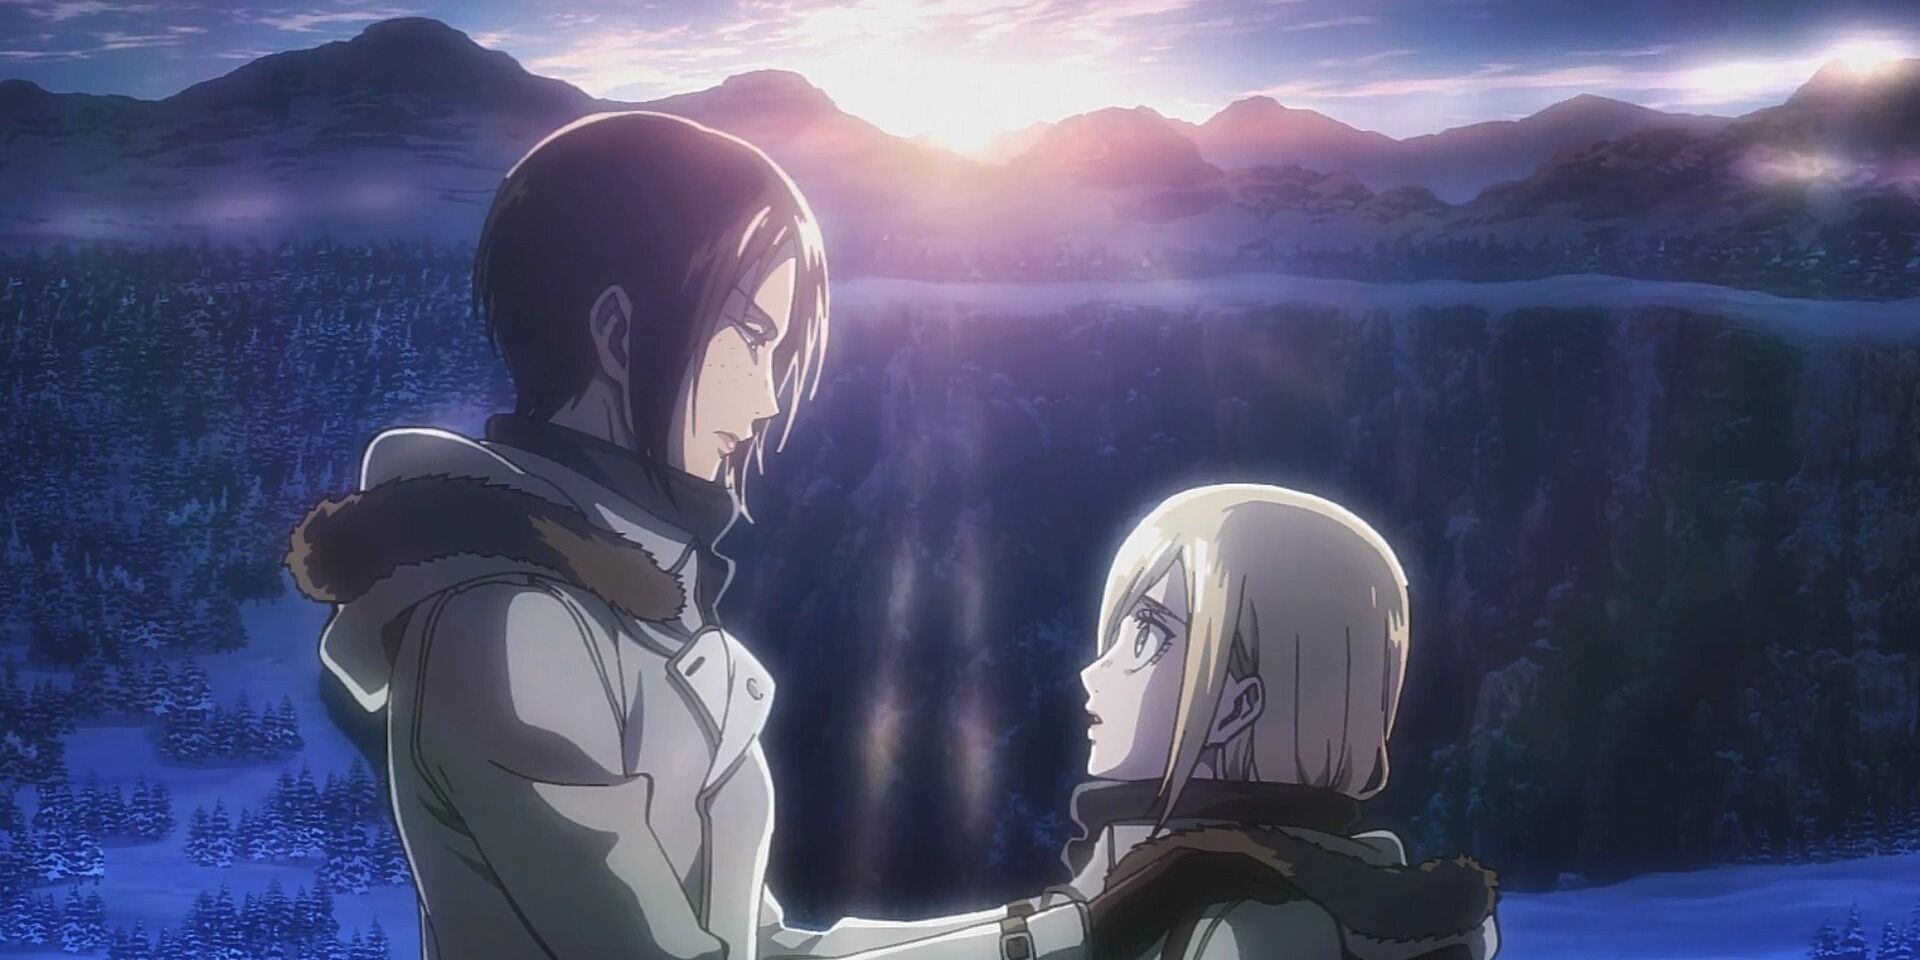 Ymir and Historia looking at each other.